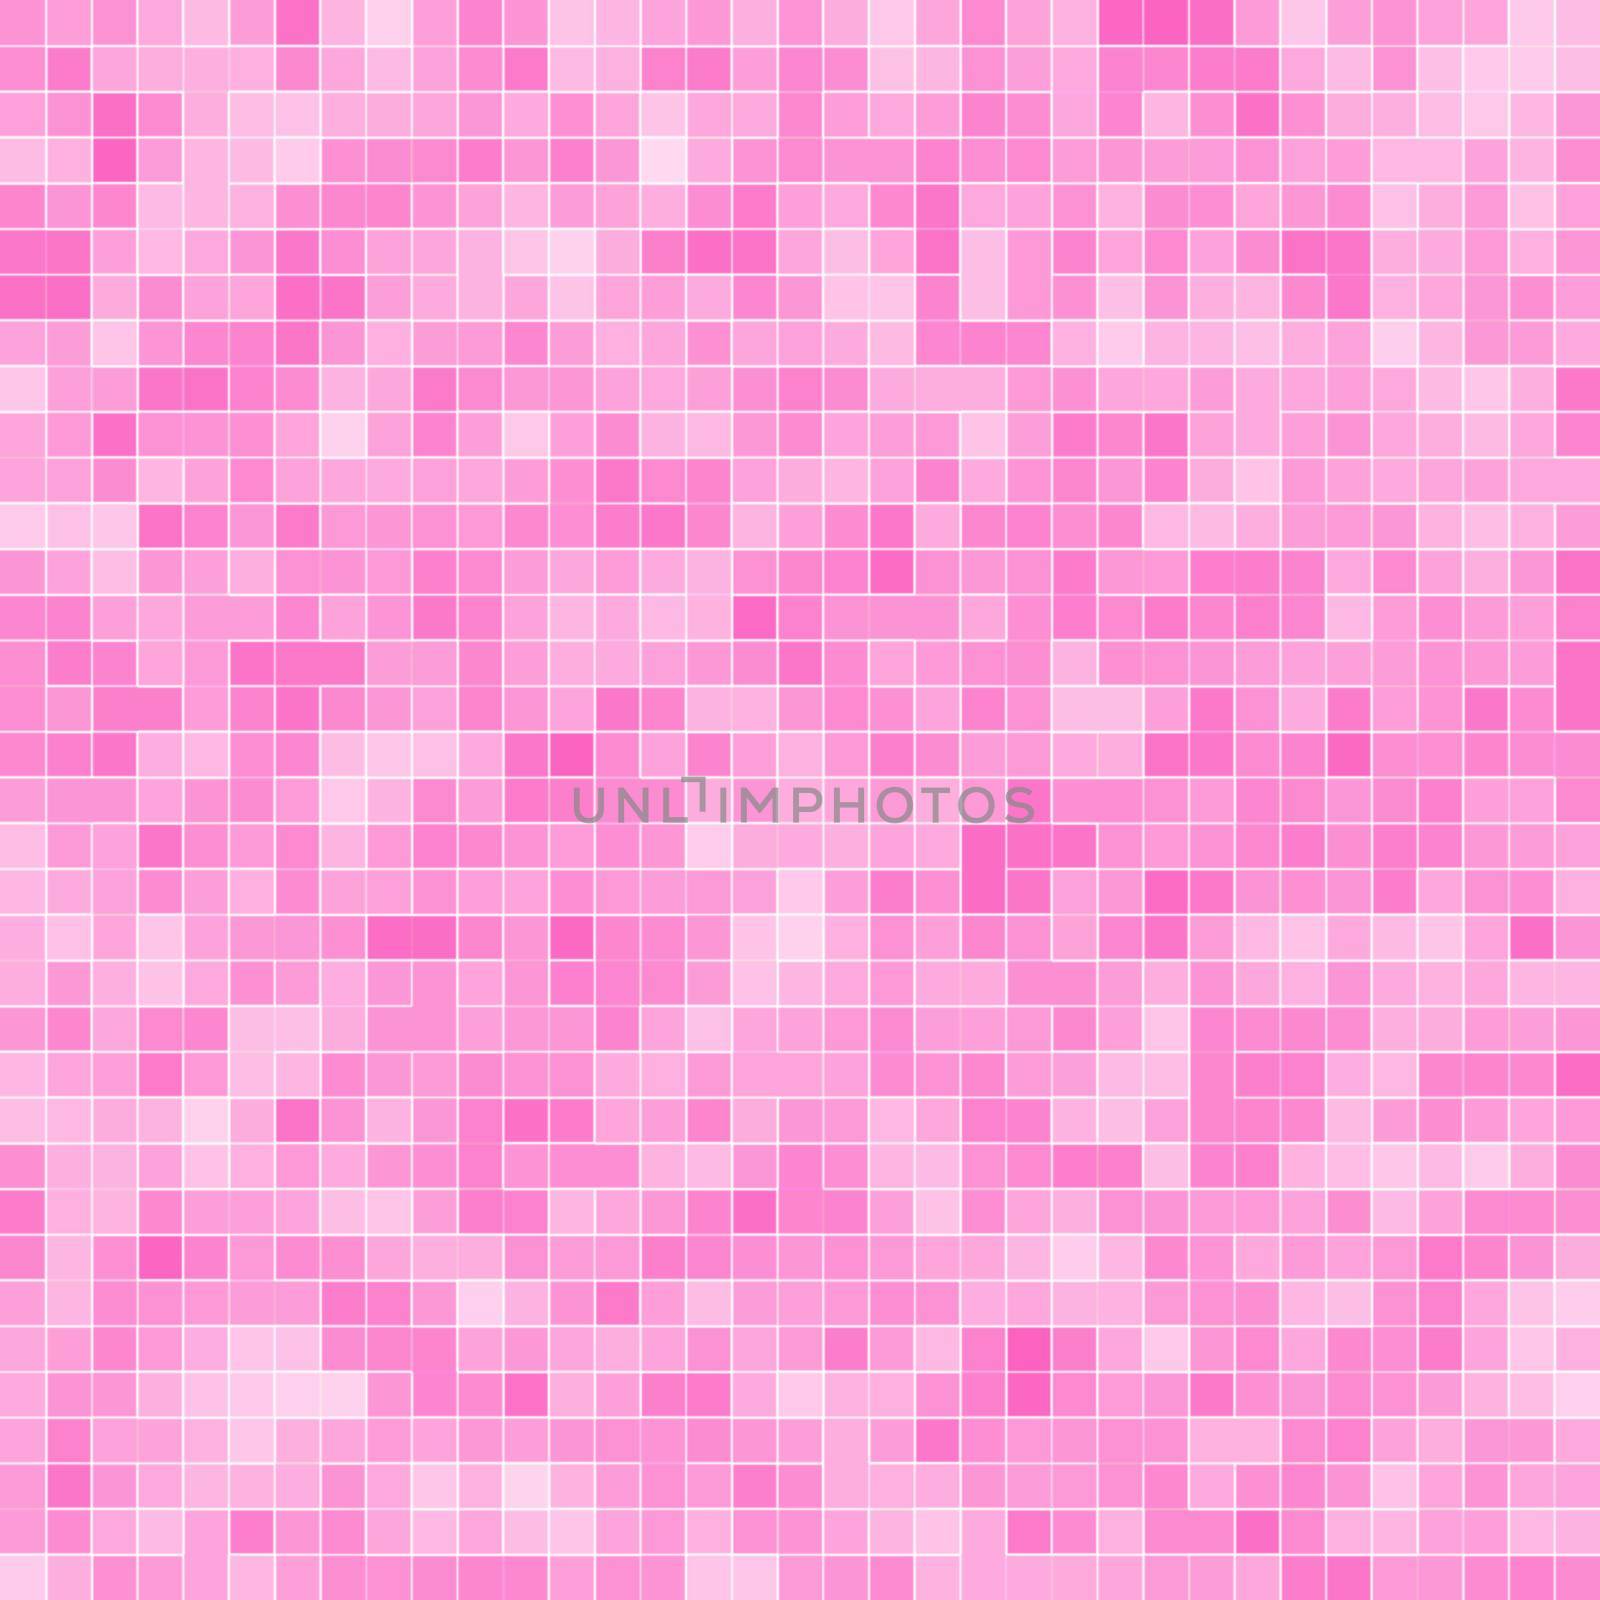 Abstract Luxury Sweet Pastel Pink Tone Wall Floor Tile Glass Seamless Pattern Mosaic Background Texture for Furniture Material.